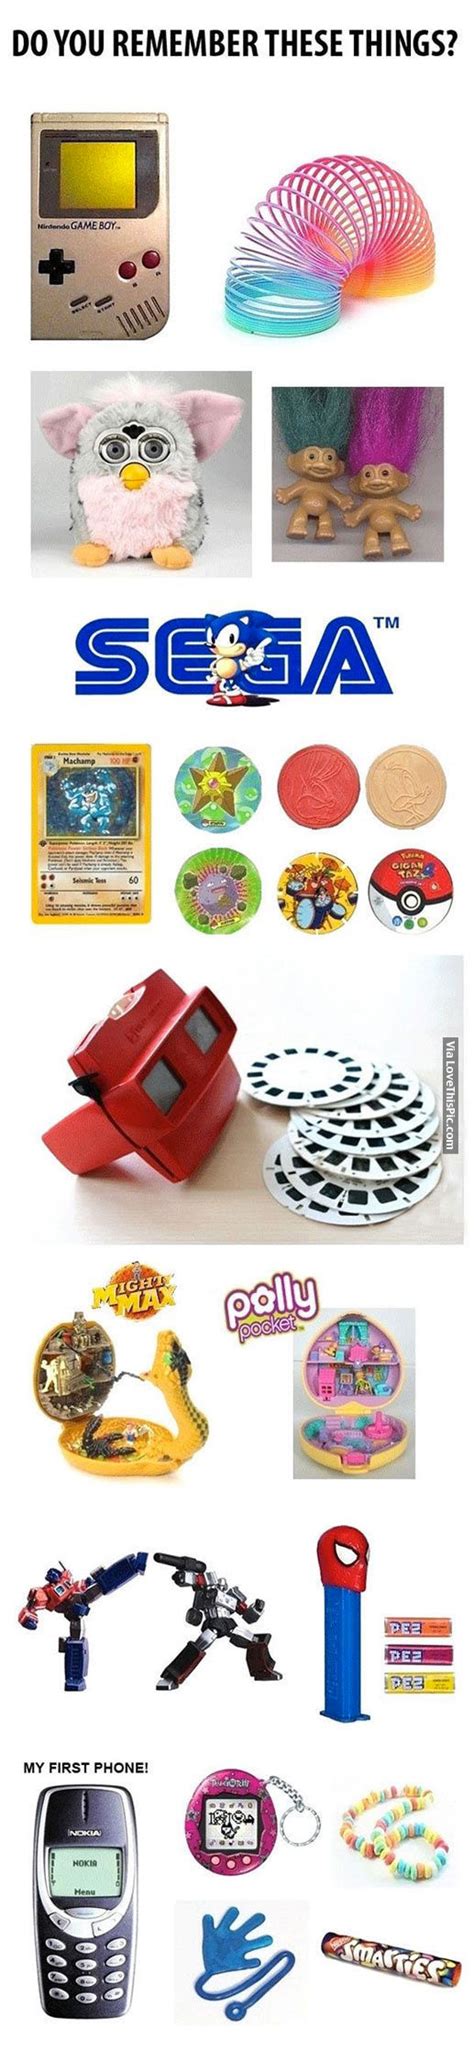 Do You Remember These Things Pictures Photos And Images